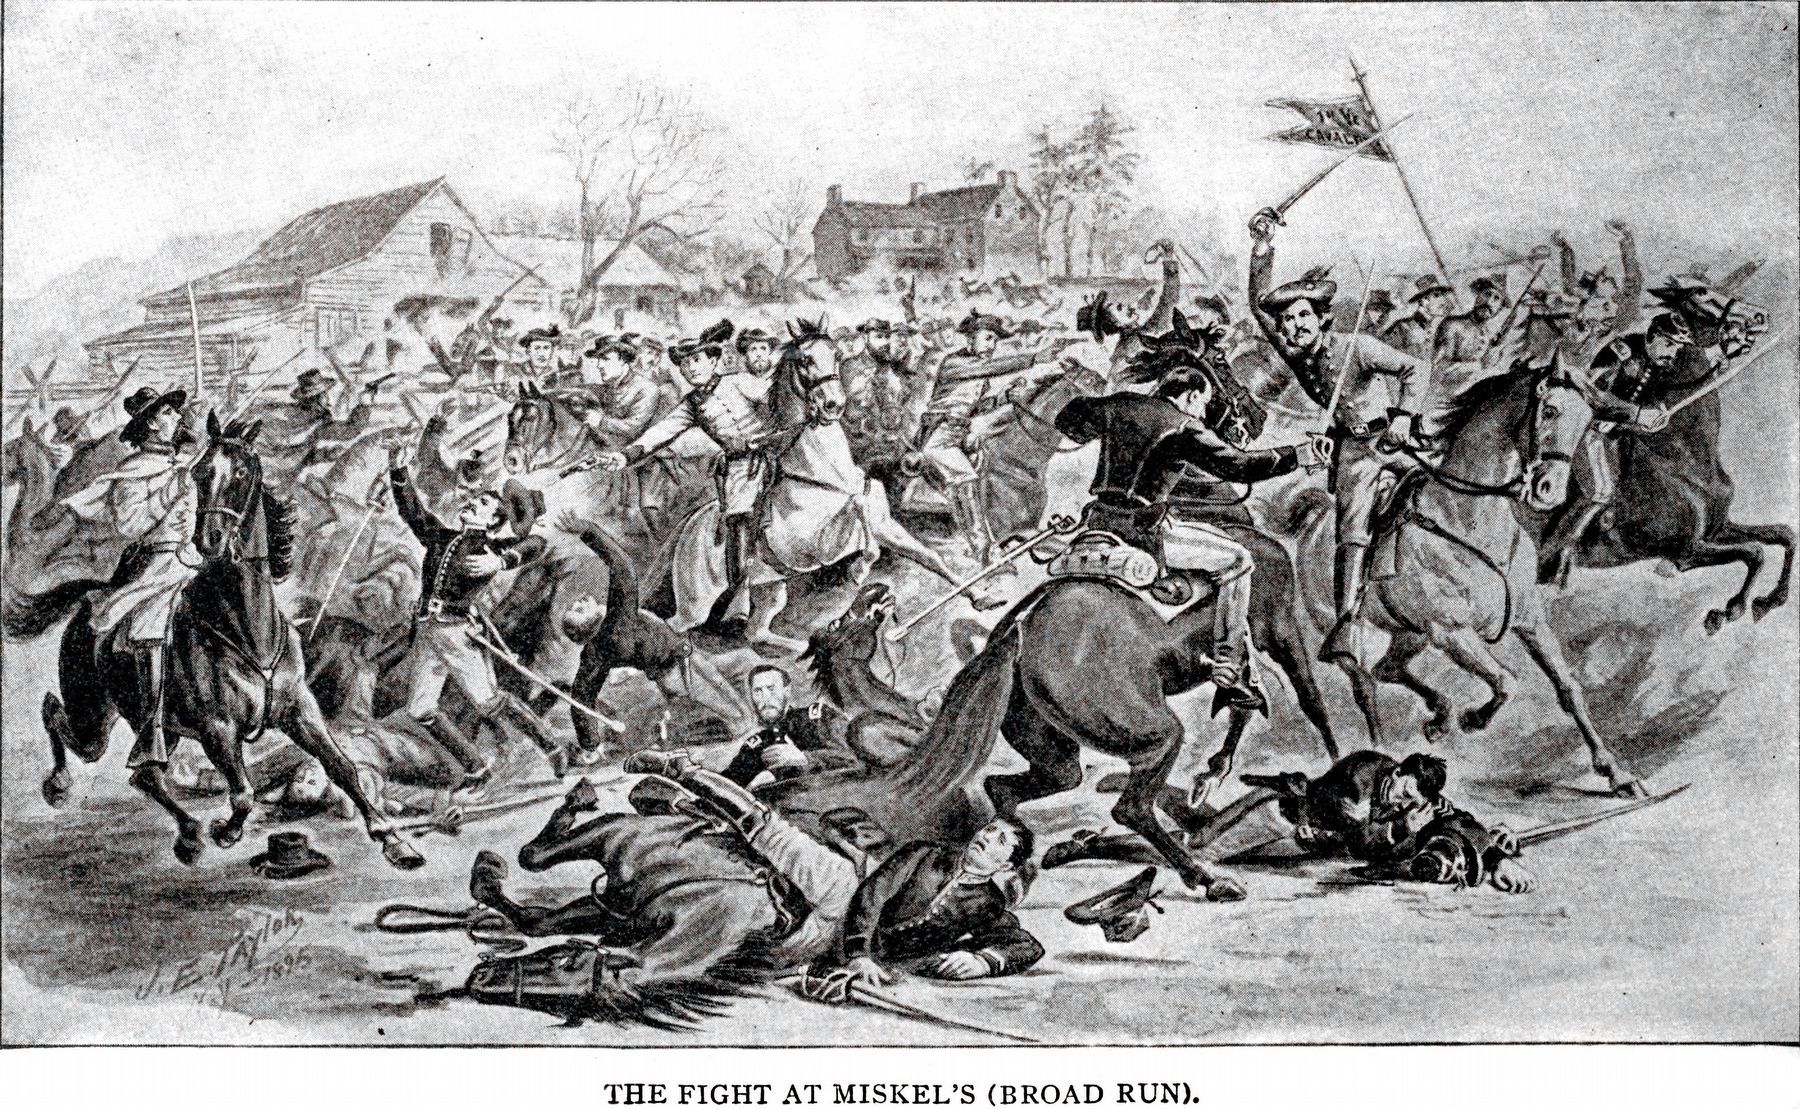 The Fight at Miskel's (Broad Run) image. Click for full size.